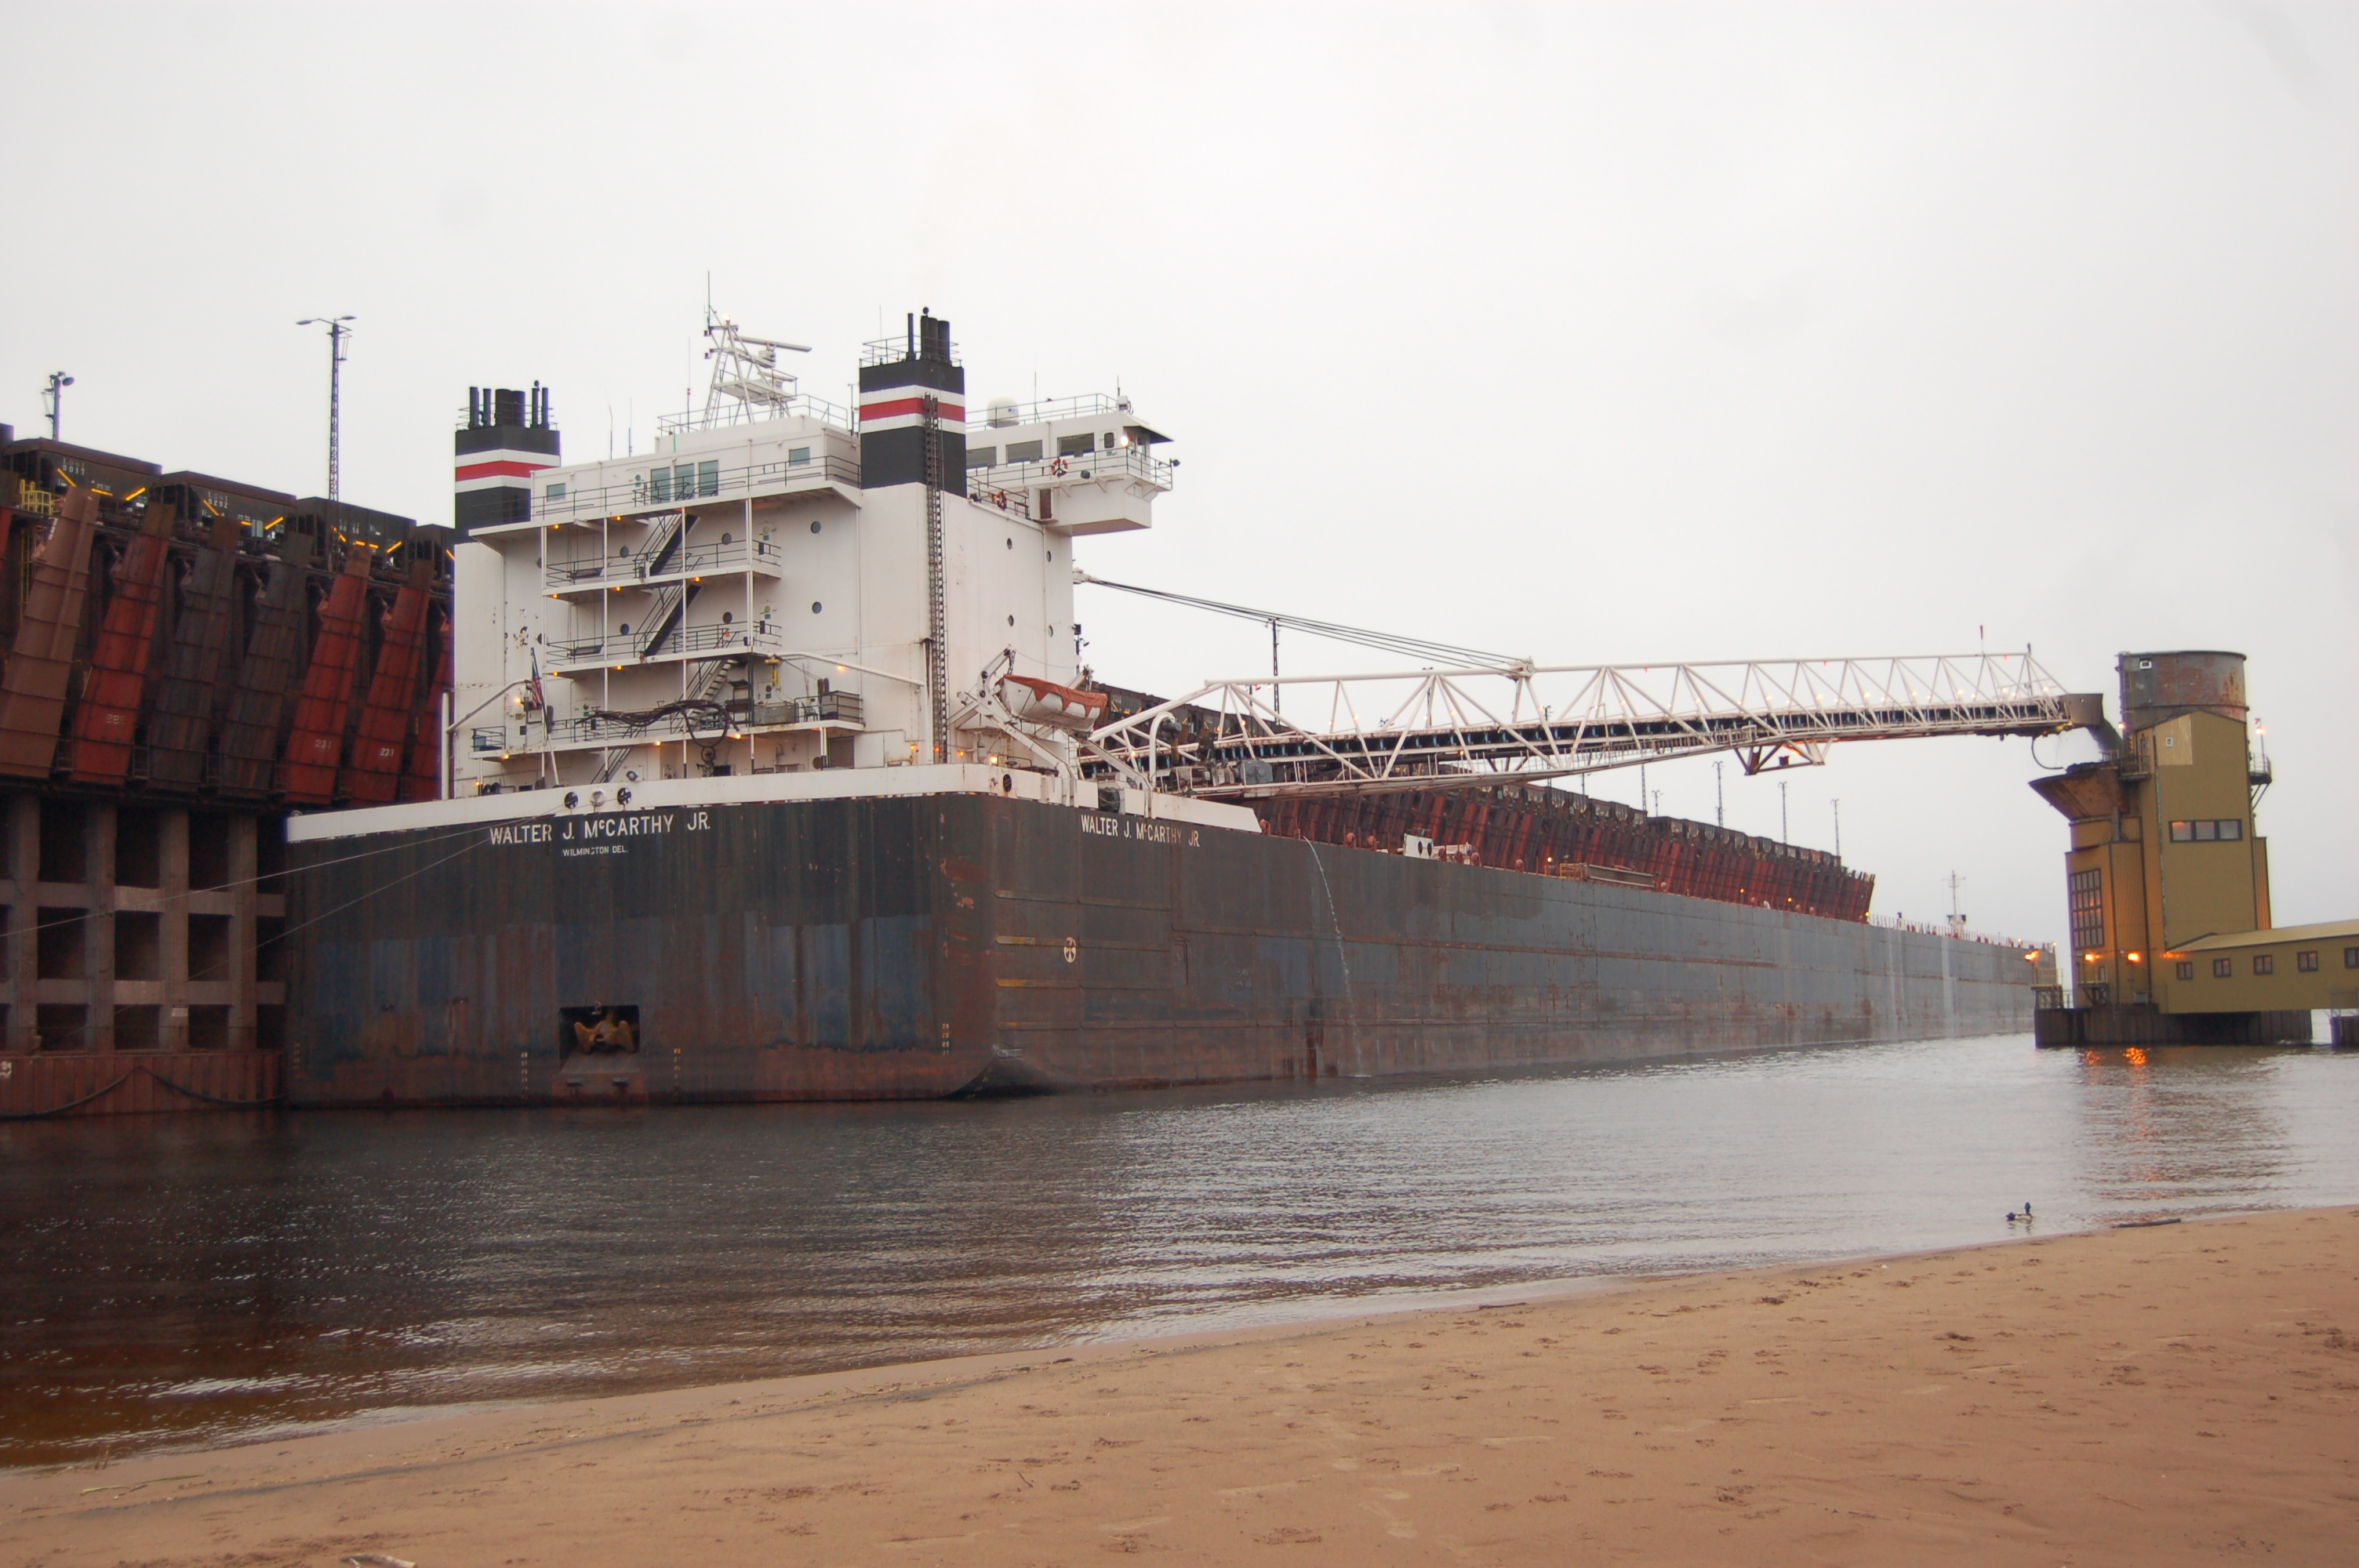 Walter S. McCarthy (American Steamship Co.) at Marquette upper harbor ore dock